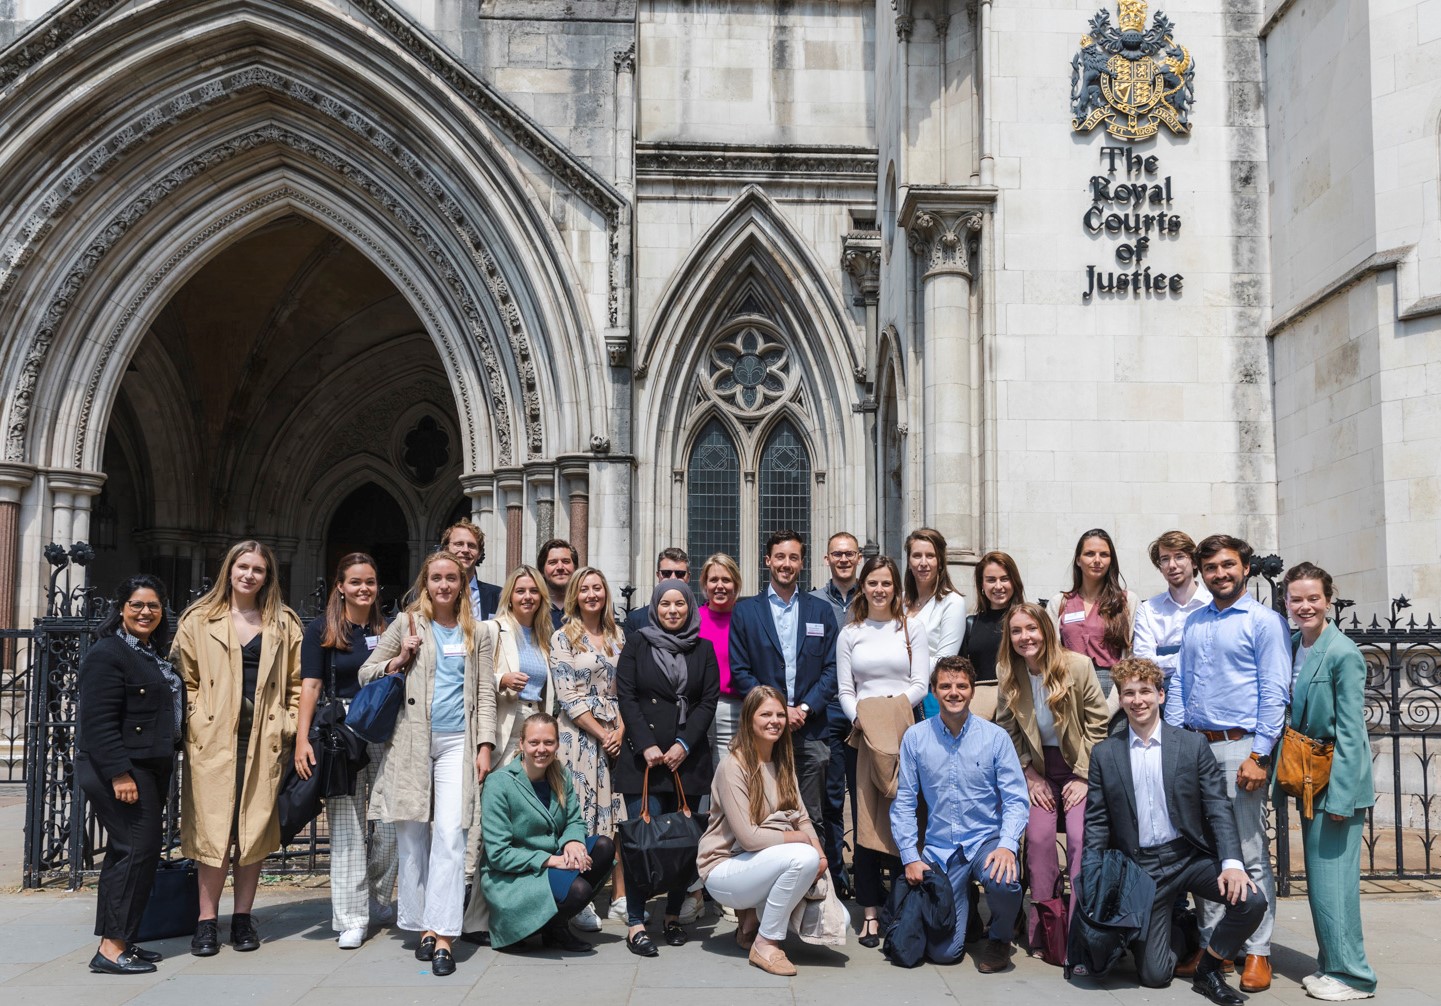 A group of smartly dressed people outside the Royal Courts of Justice building.